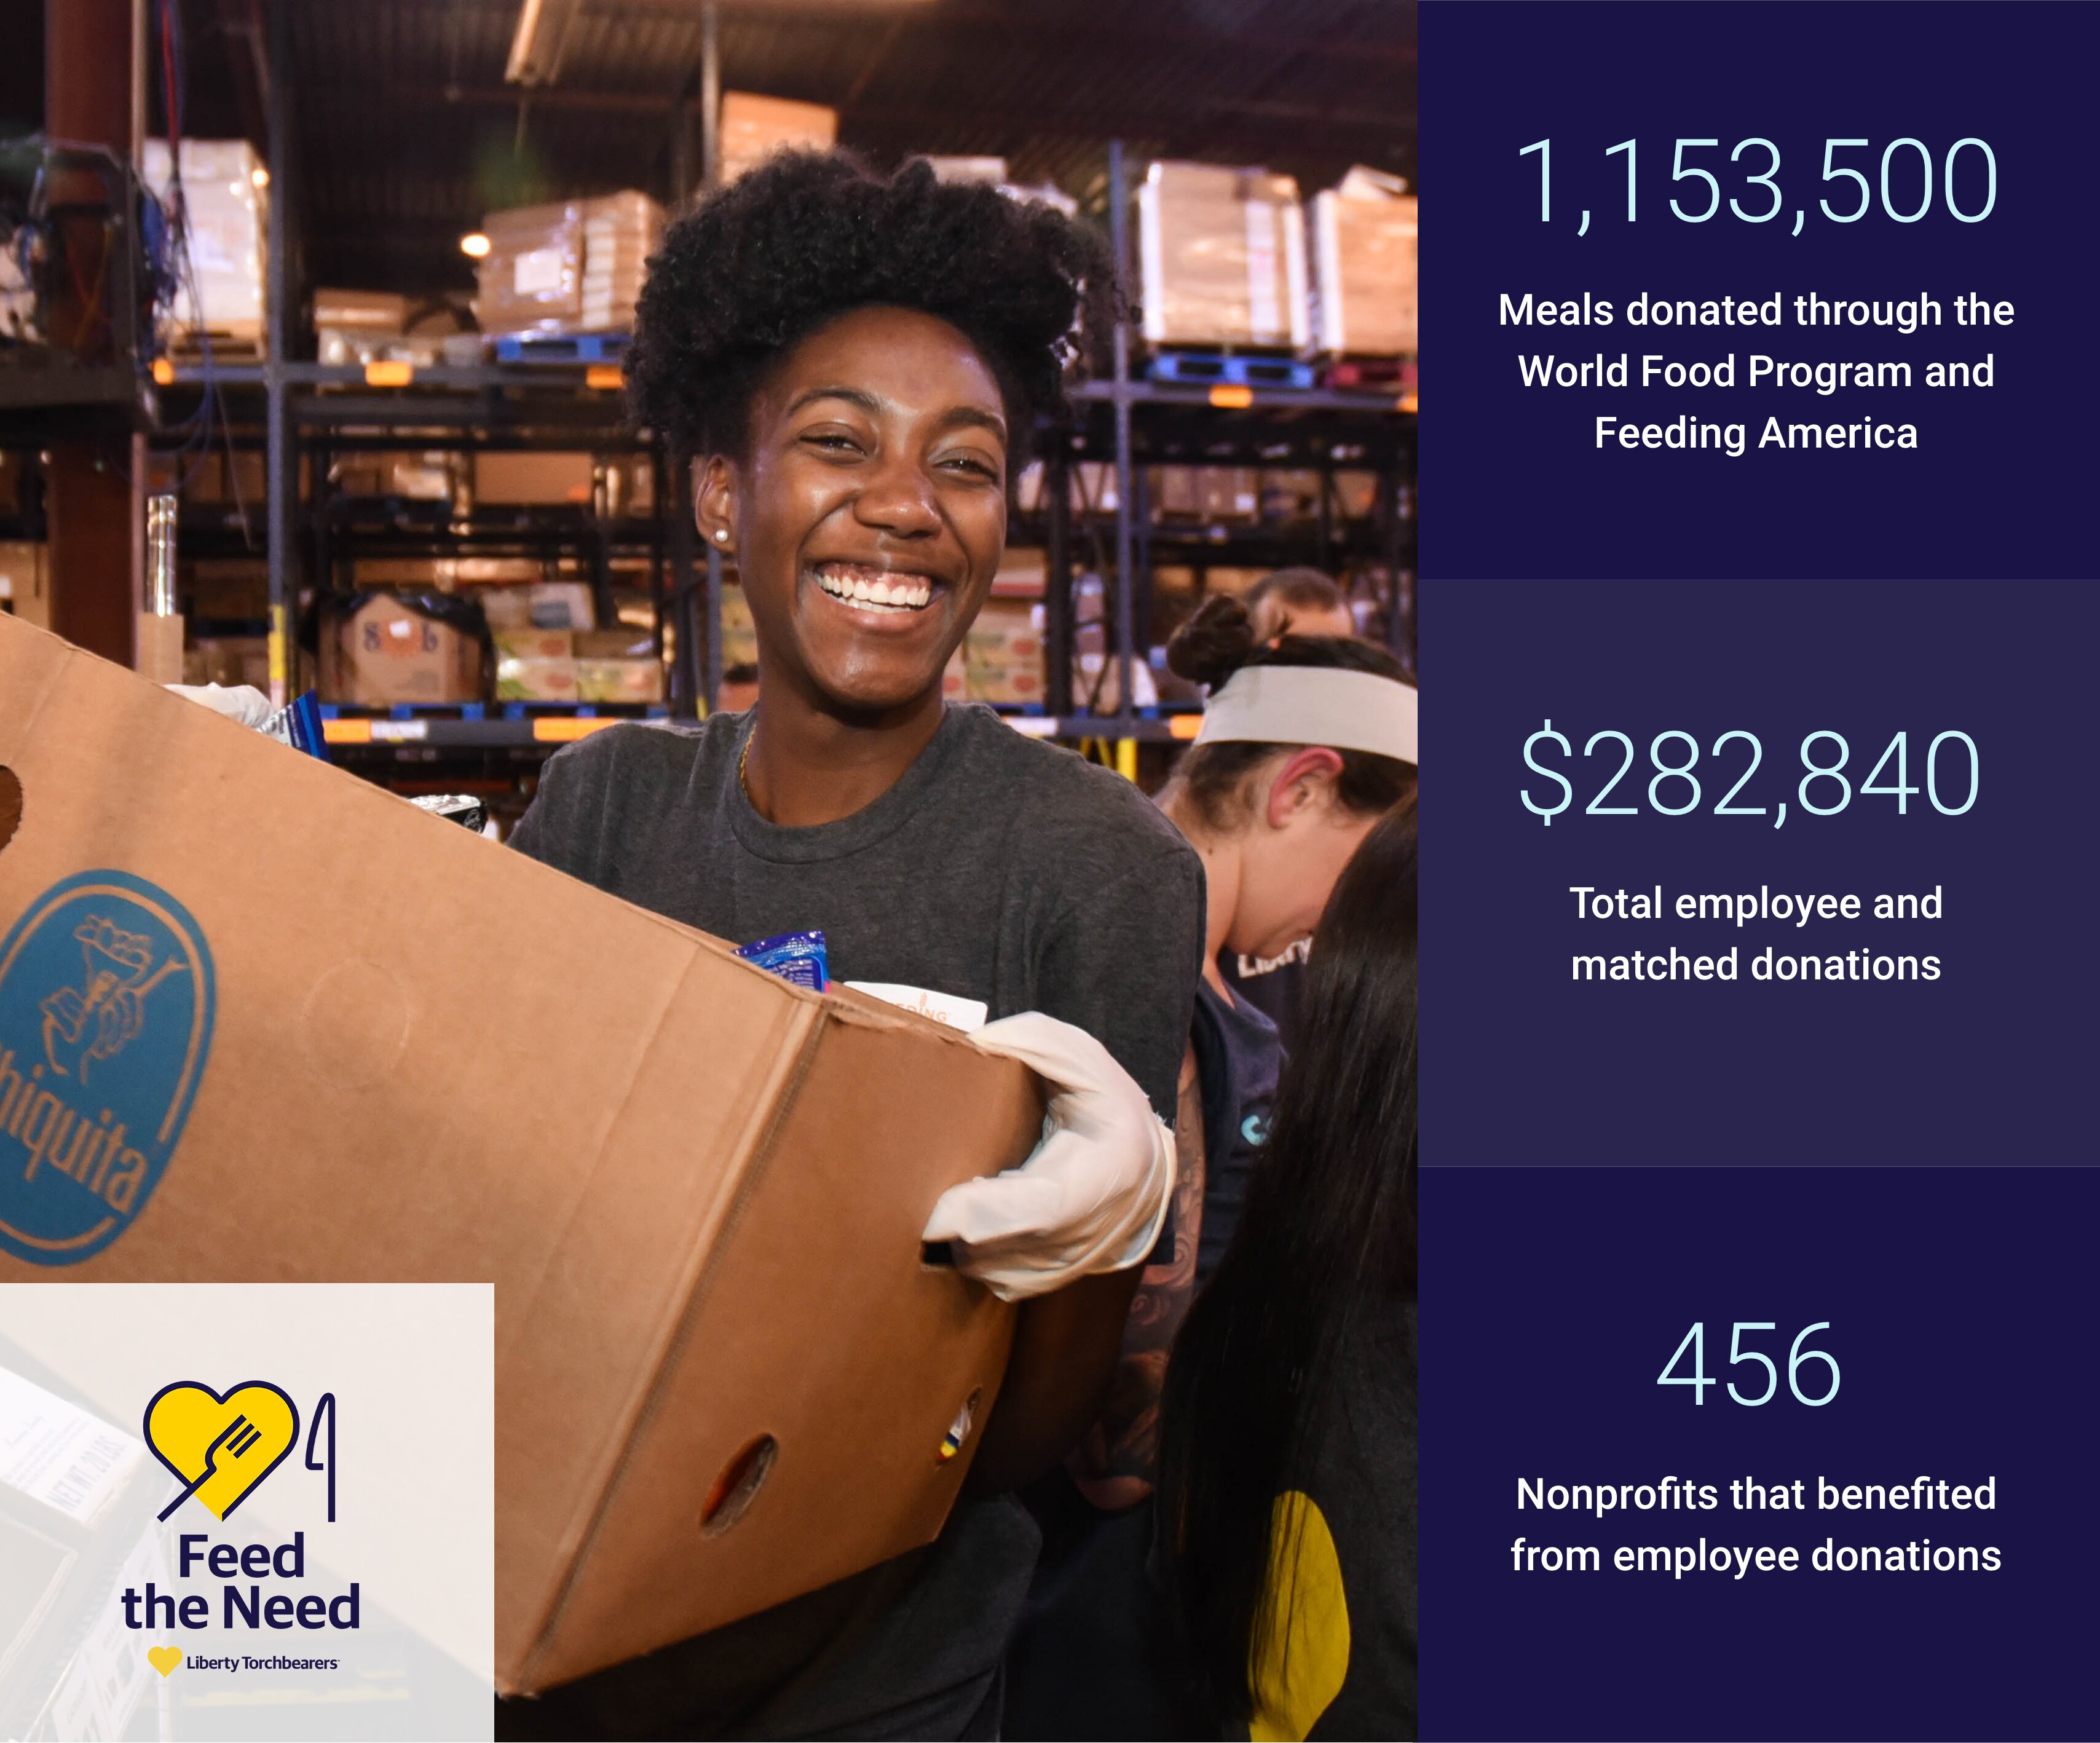 Young woman holding a box smiling to camera. To right are data points: 1,153,500 meals donated through the World Food Program and Feeding America, $282,840 Total employee and matched donations, 456 nonprofits that benefited from employee donations